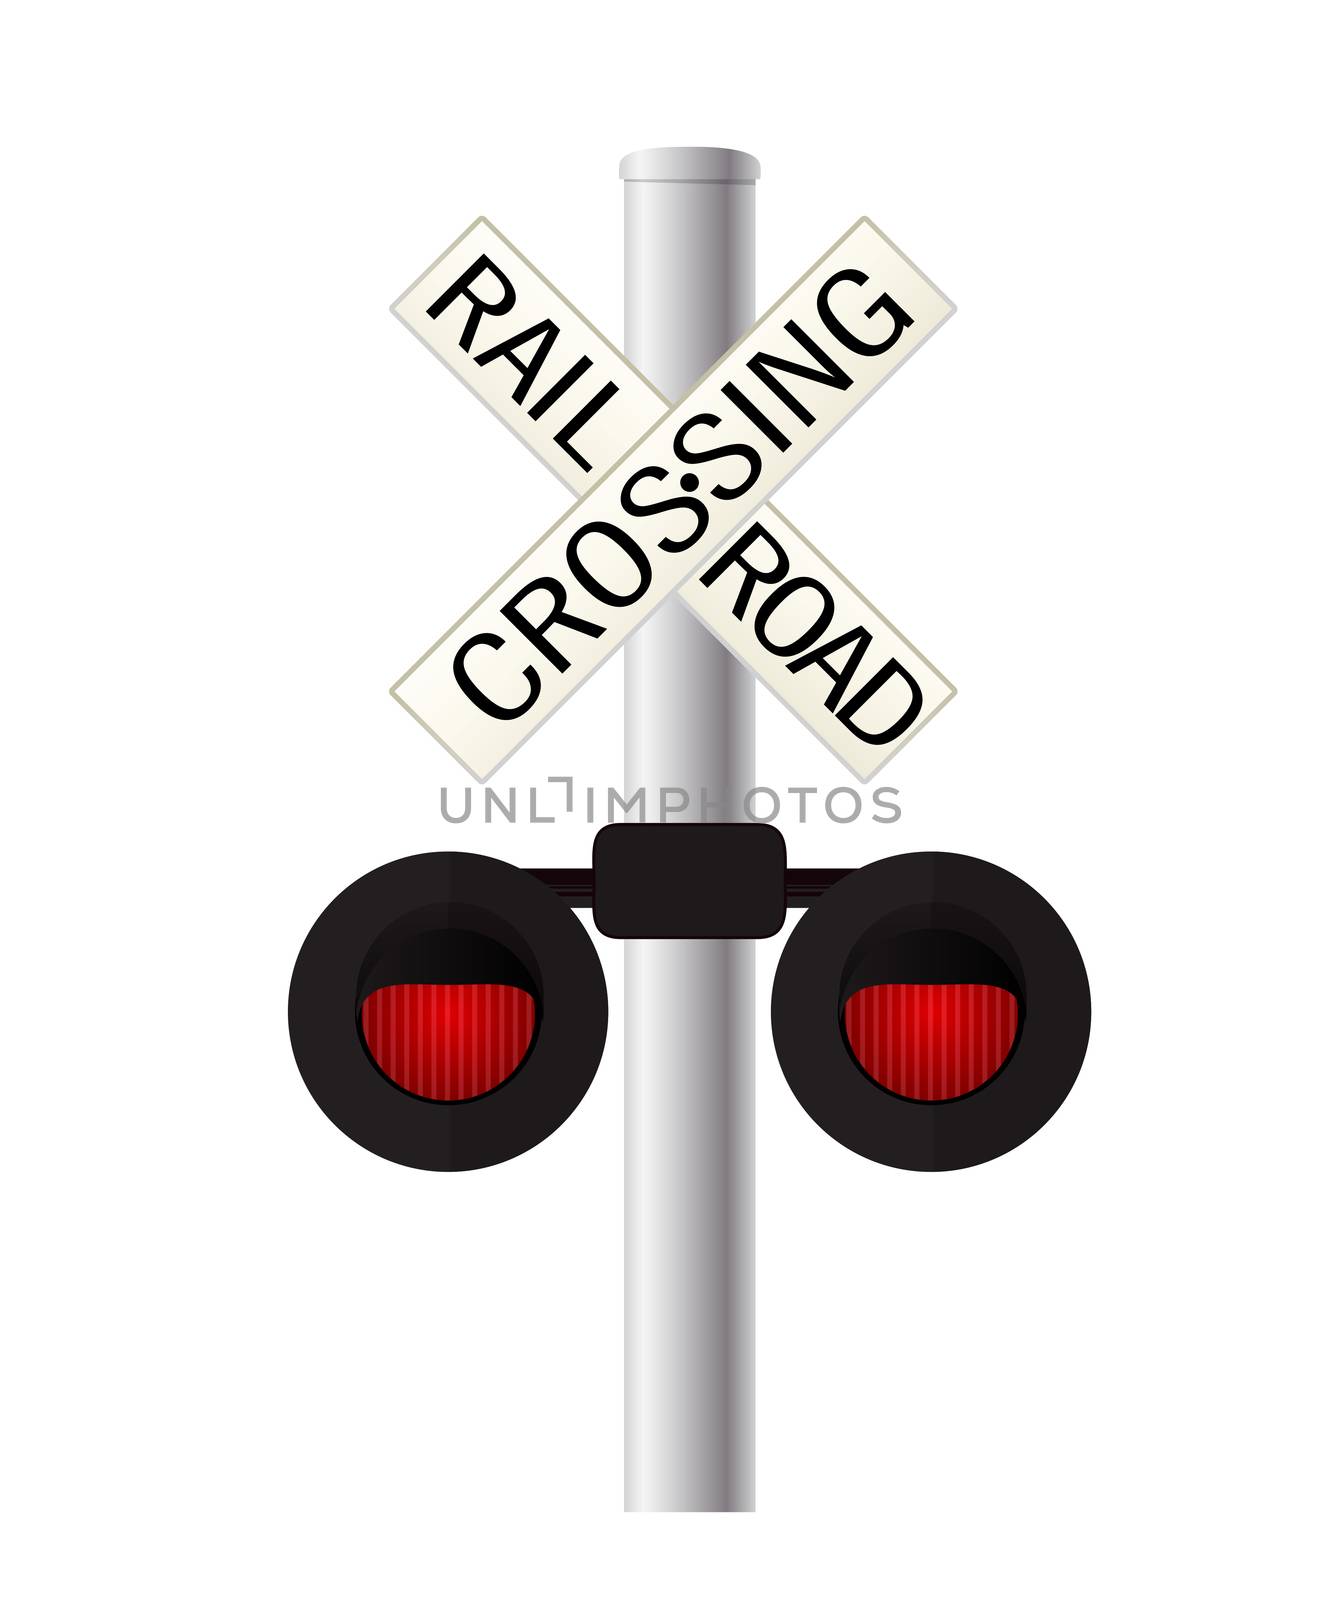 Railroad crossing sign over white background